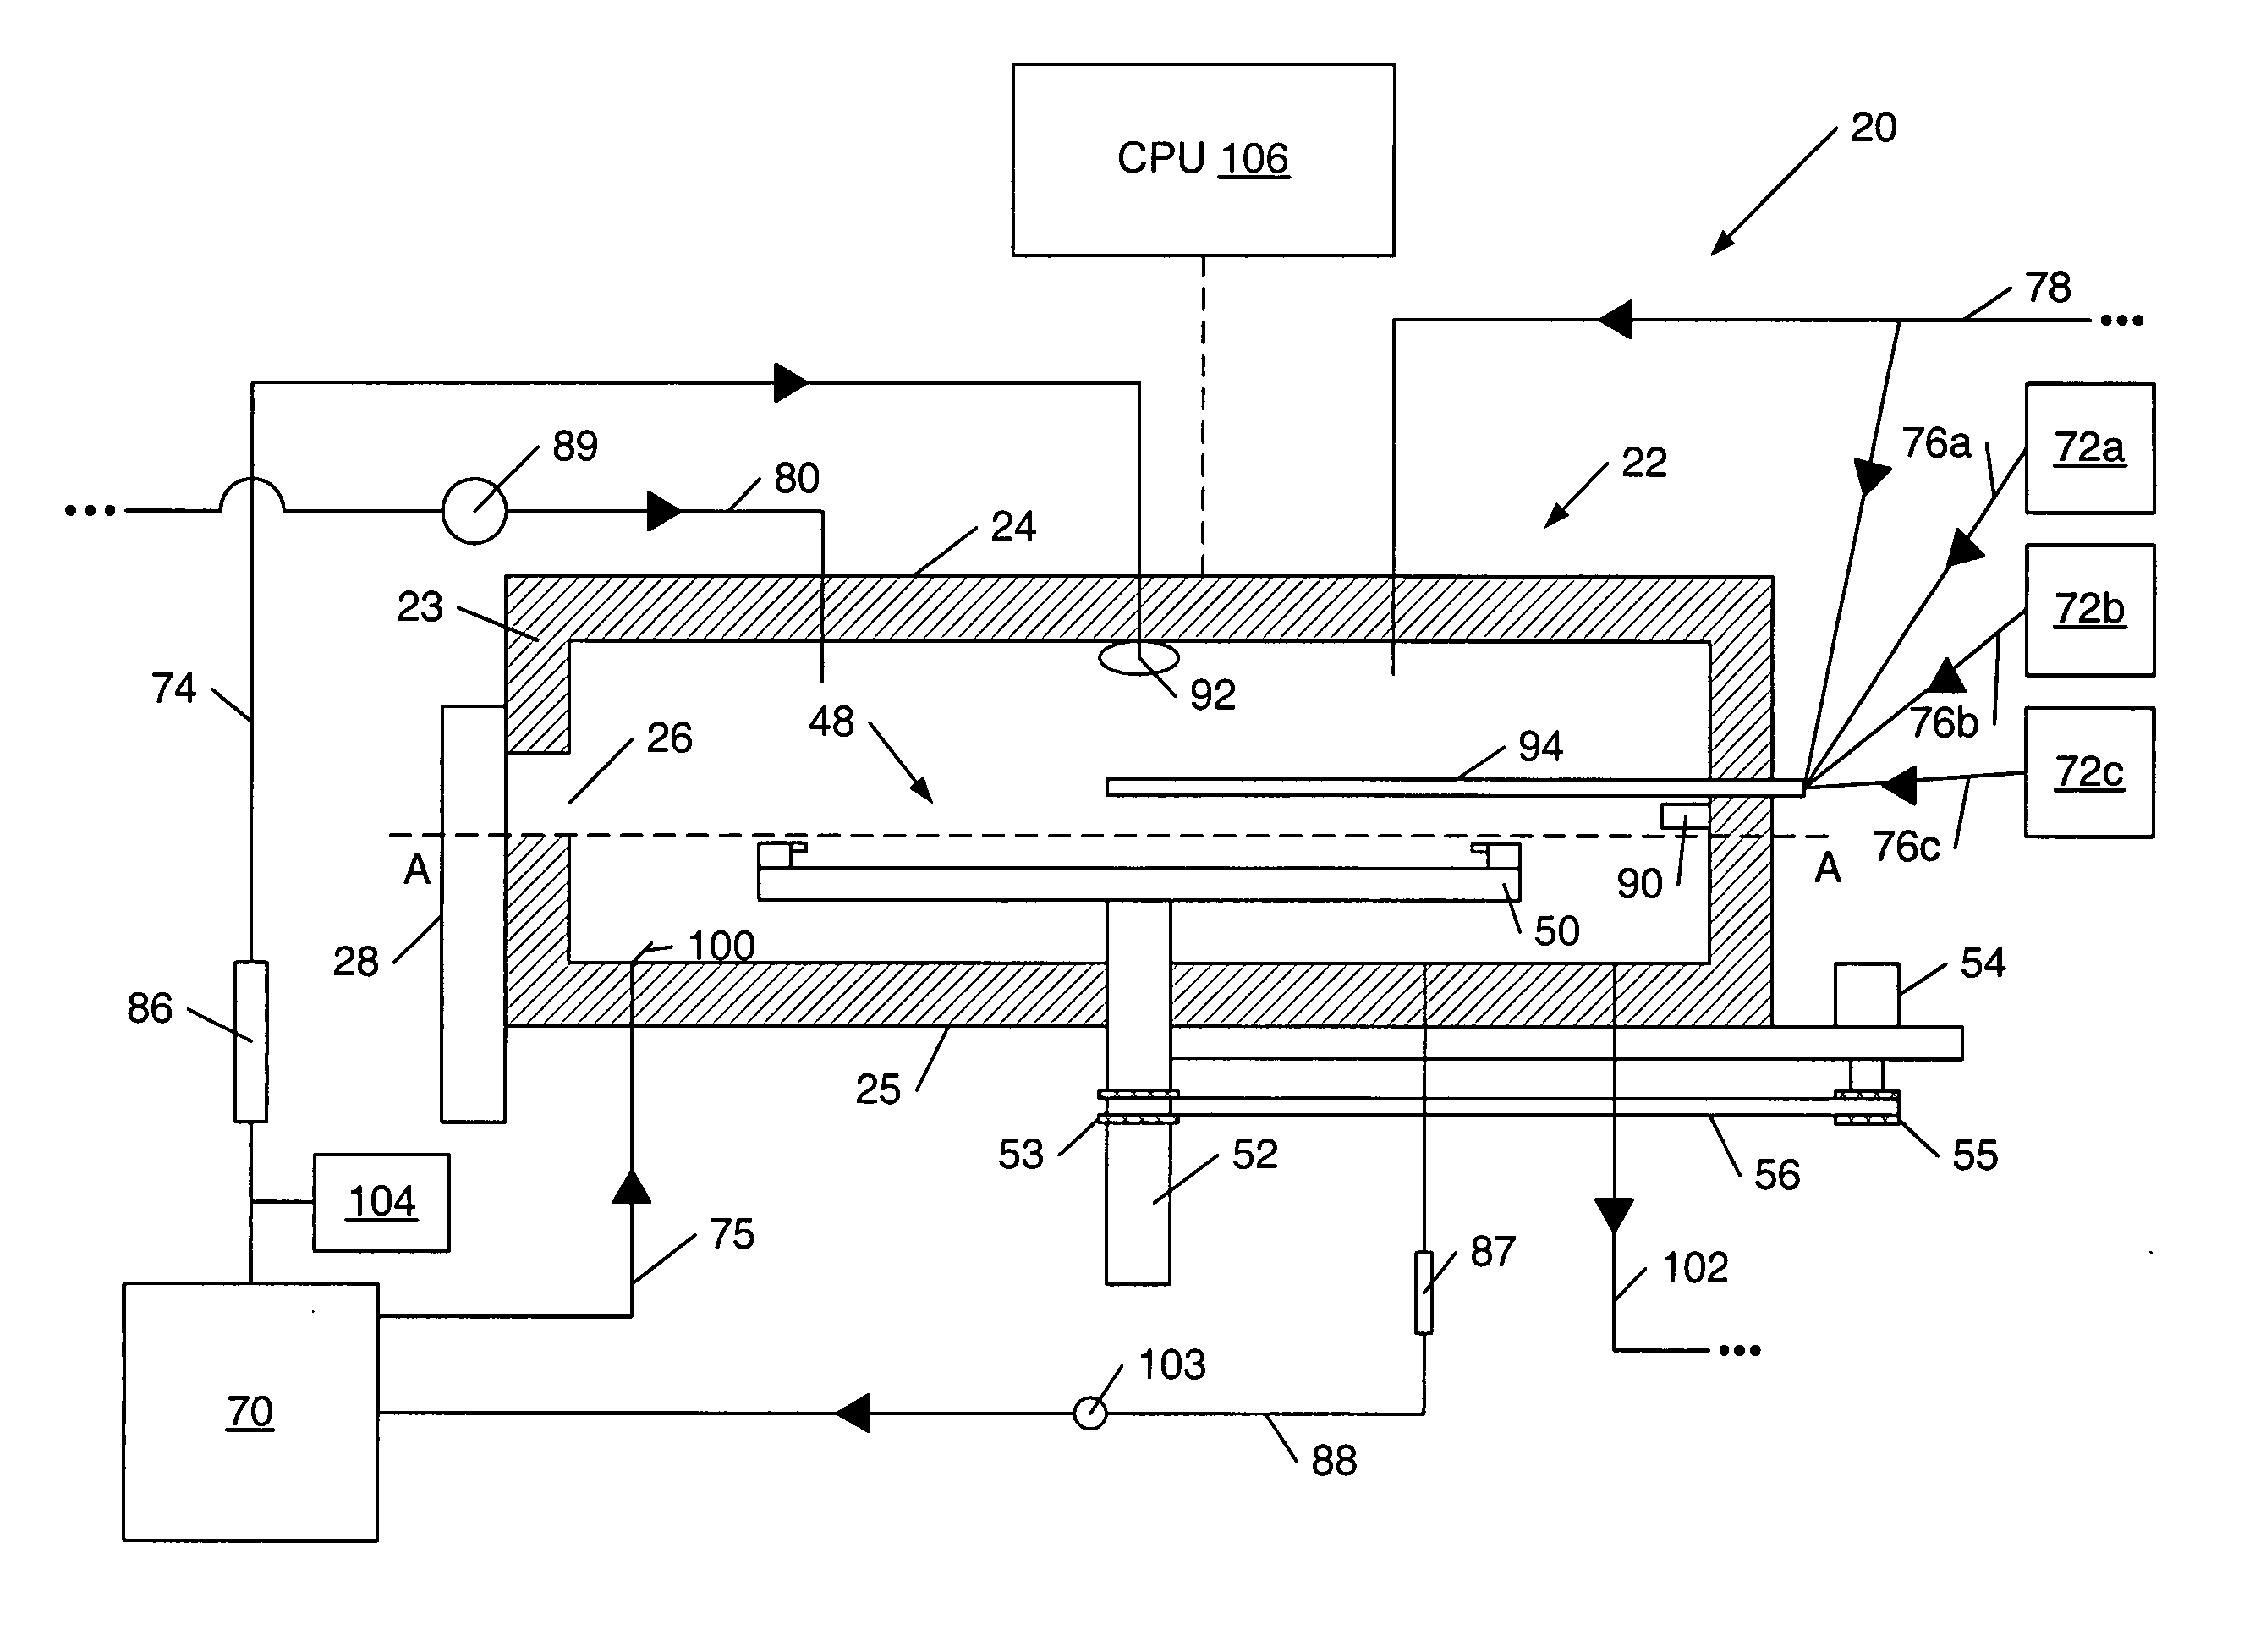 Microelectronic fabrication system components and method for processing a wafer using such components